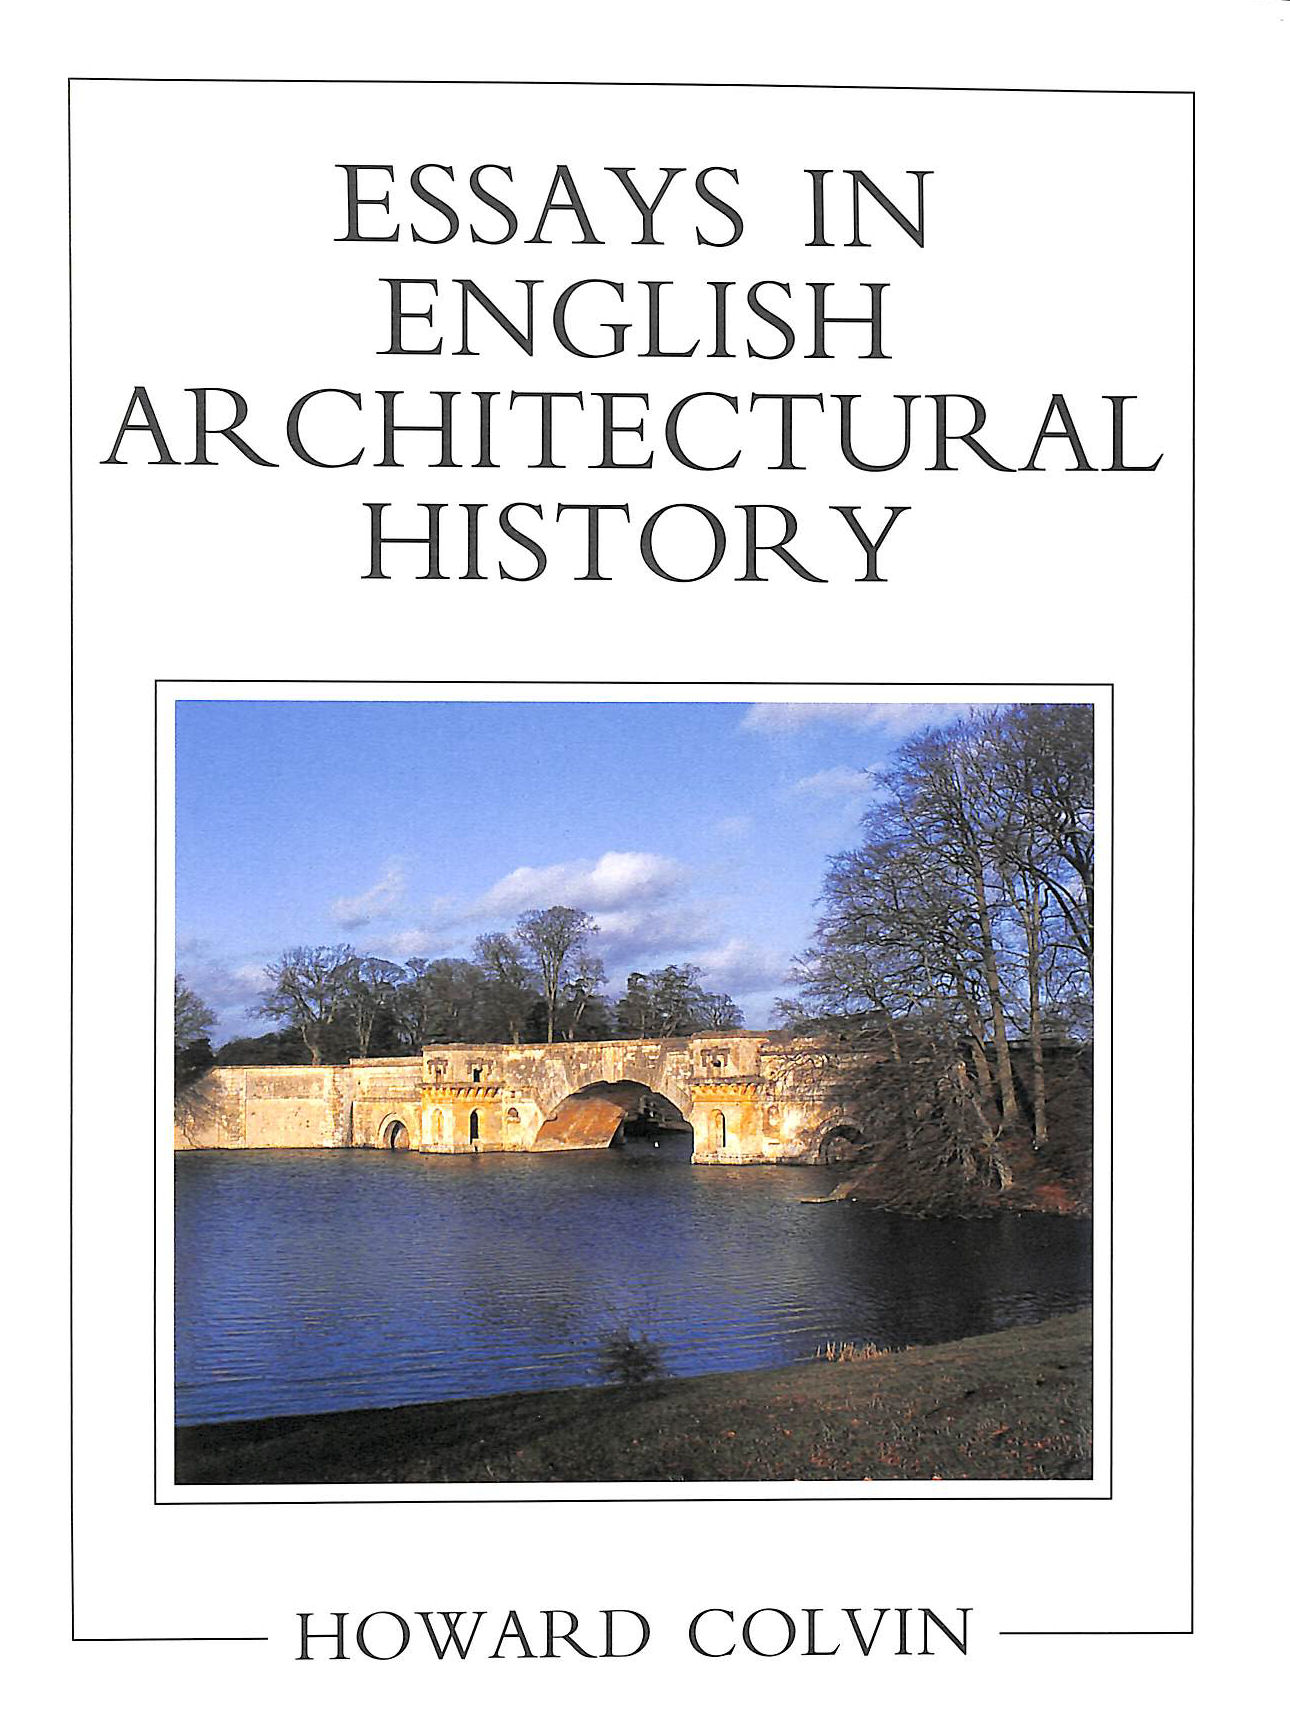 COLVIN, HOWARD - Essays in English Architectural History (The Paul Mellon Centre for Studies in British Art)